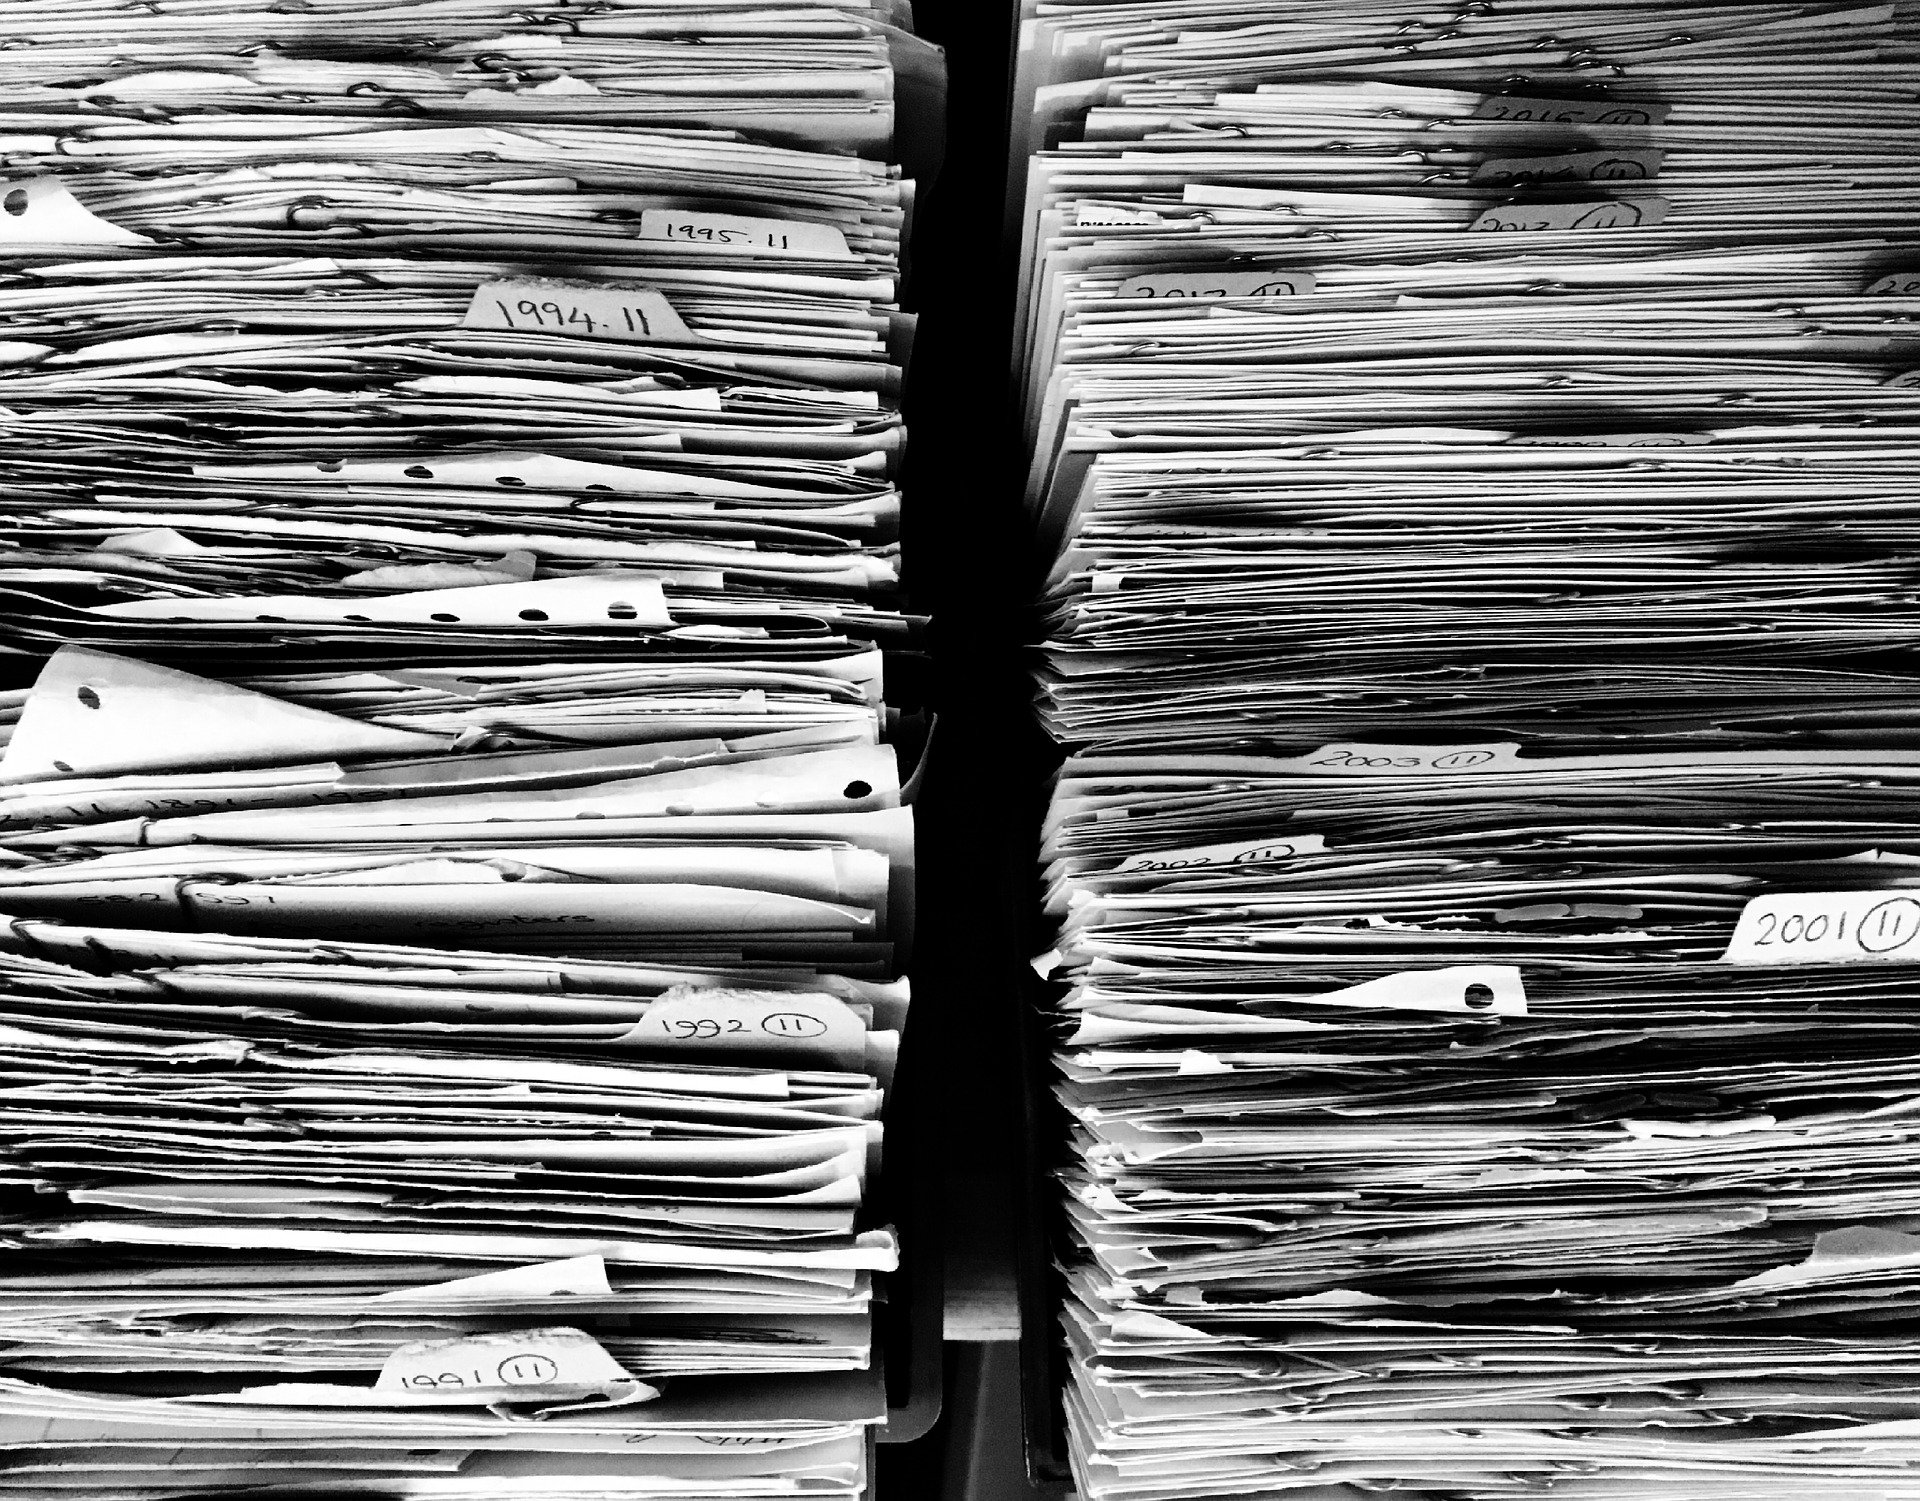 ../../_images/how-to-solve-growing-load-of-paperwork.jpg